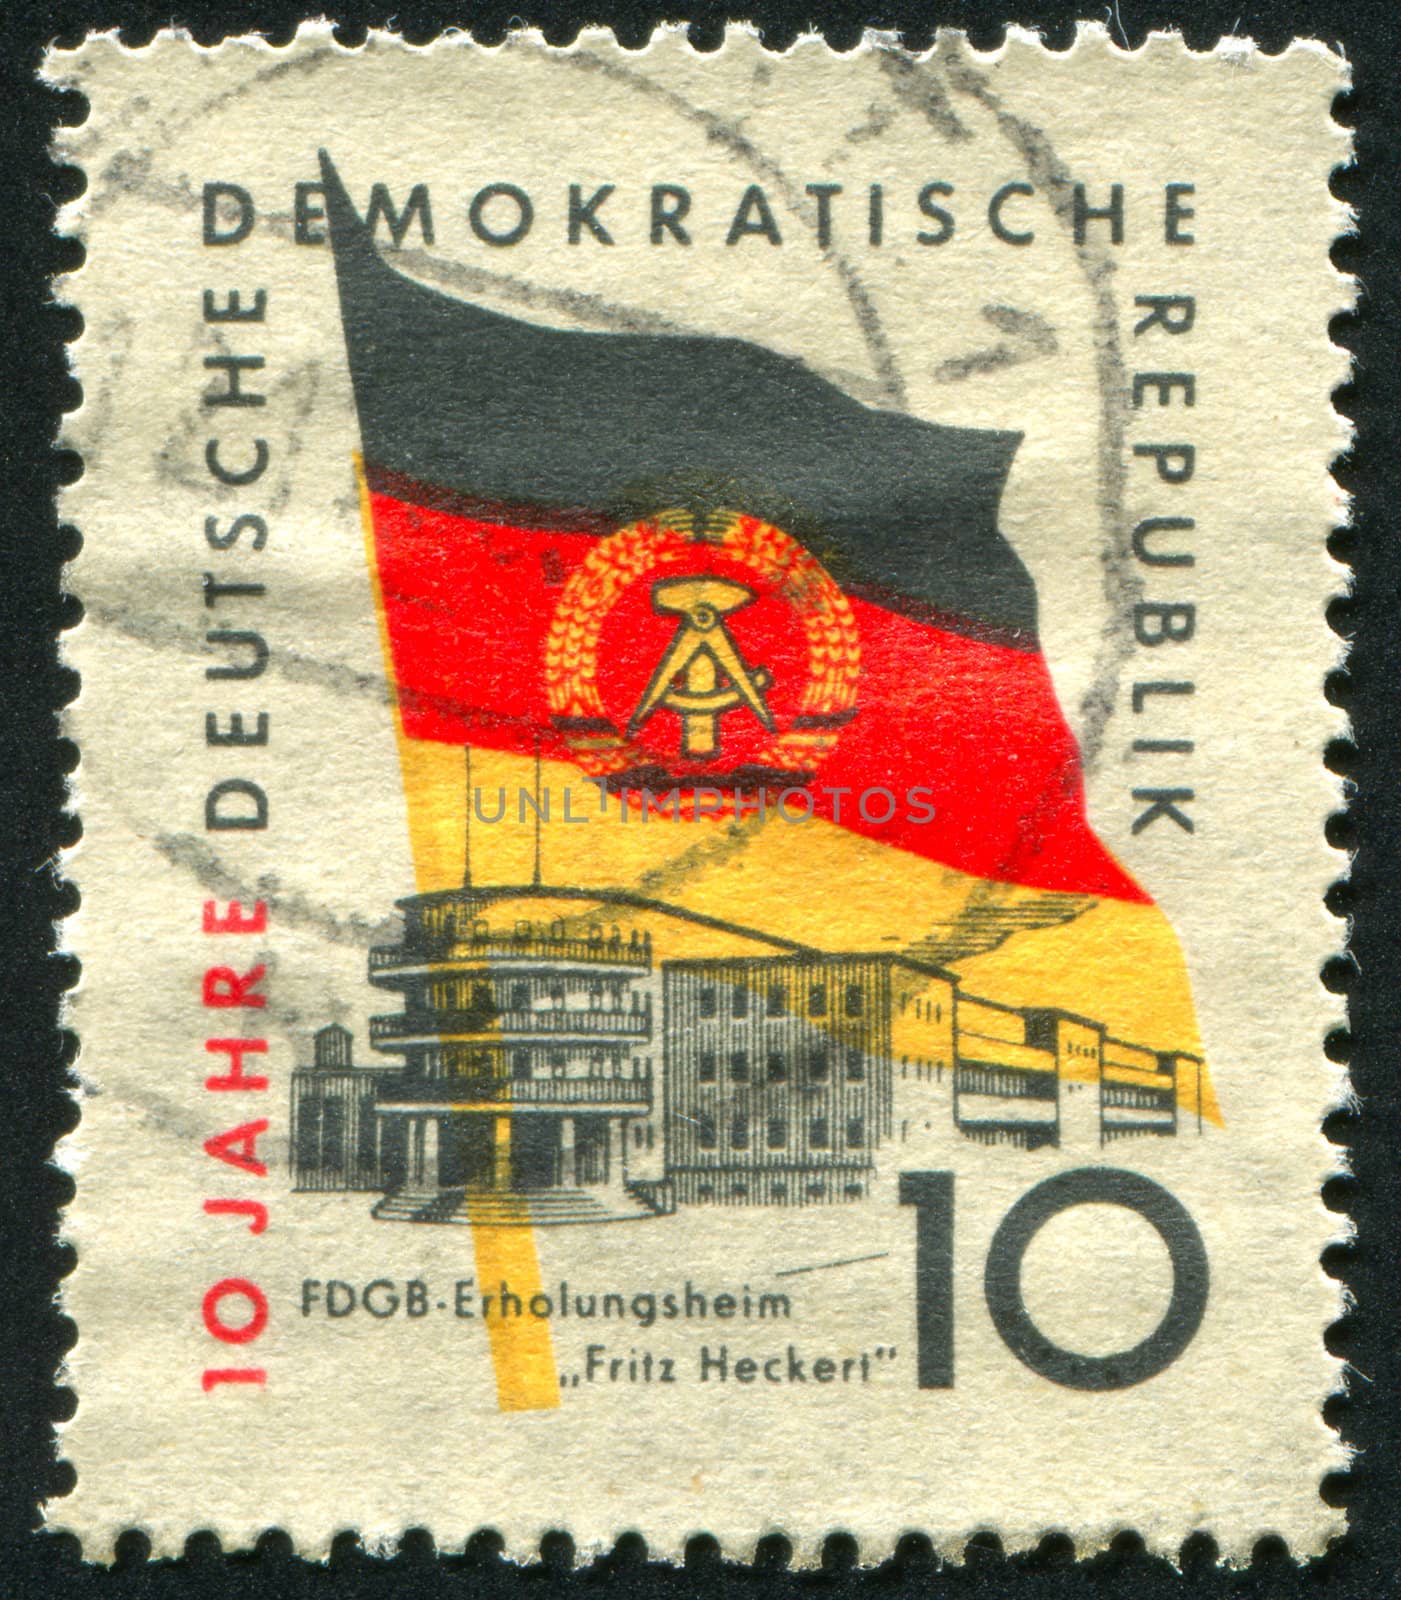 GERMANY - CIRCA 1959: stamp printed by Germany, shows Flag and building, circa 1959